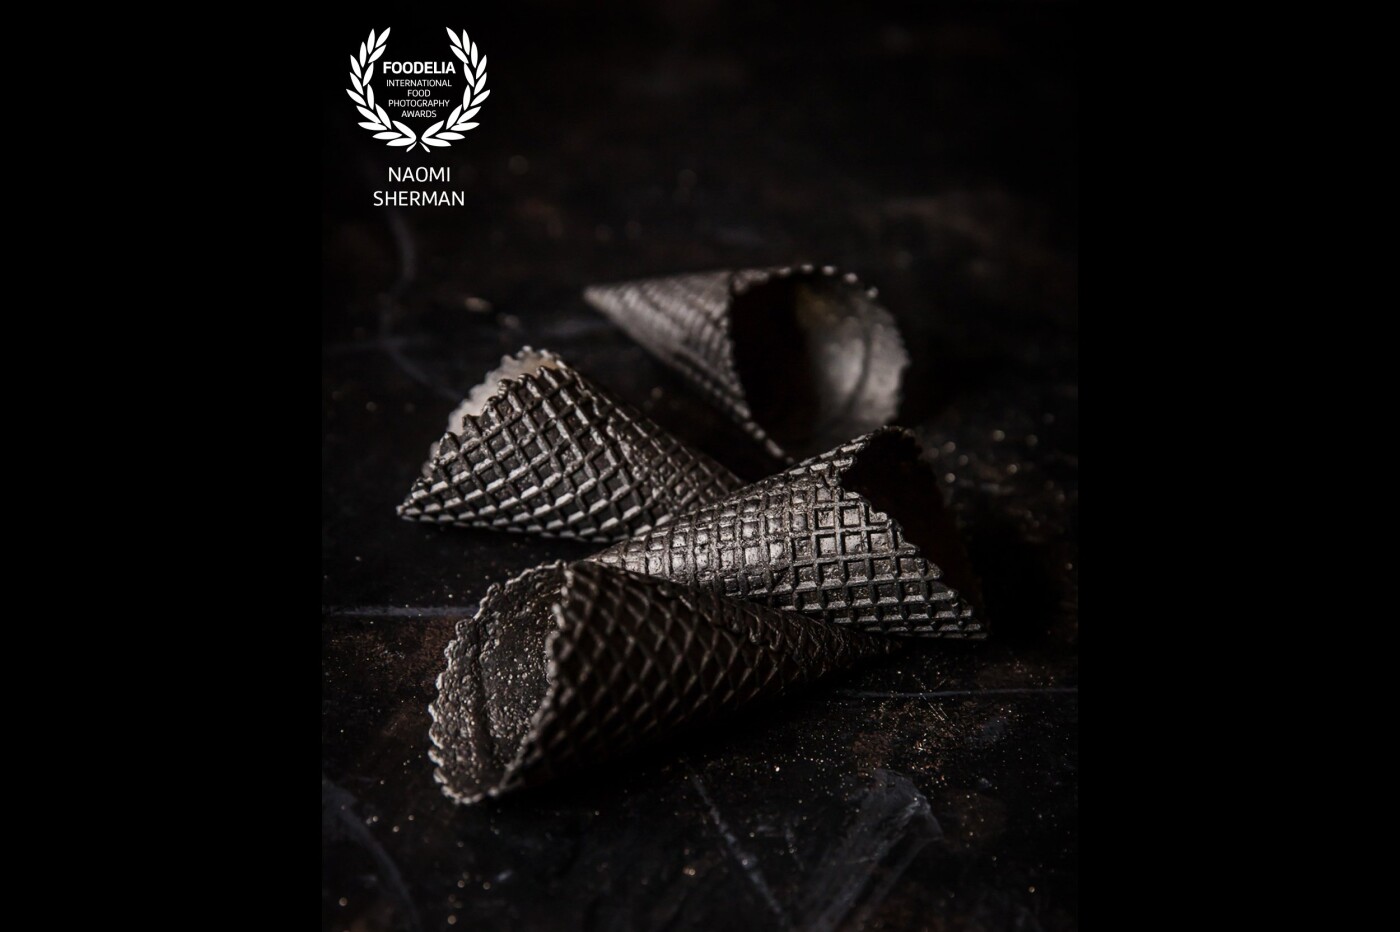 These black waffle cones were shot in my studio, using natural lighting.<br />
I particularly liked the play of light and shadow across the texture of the cones